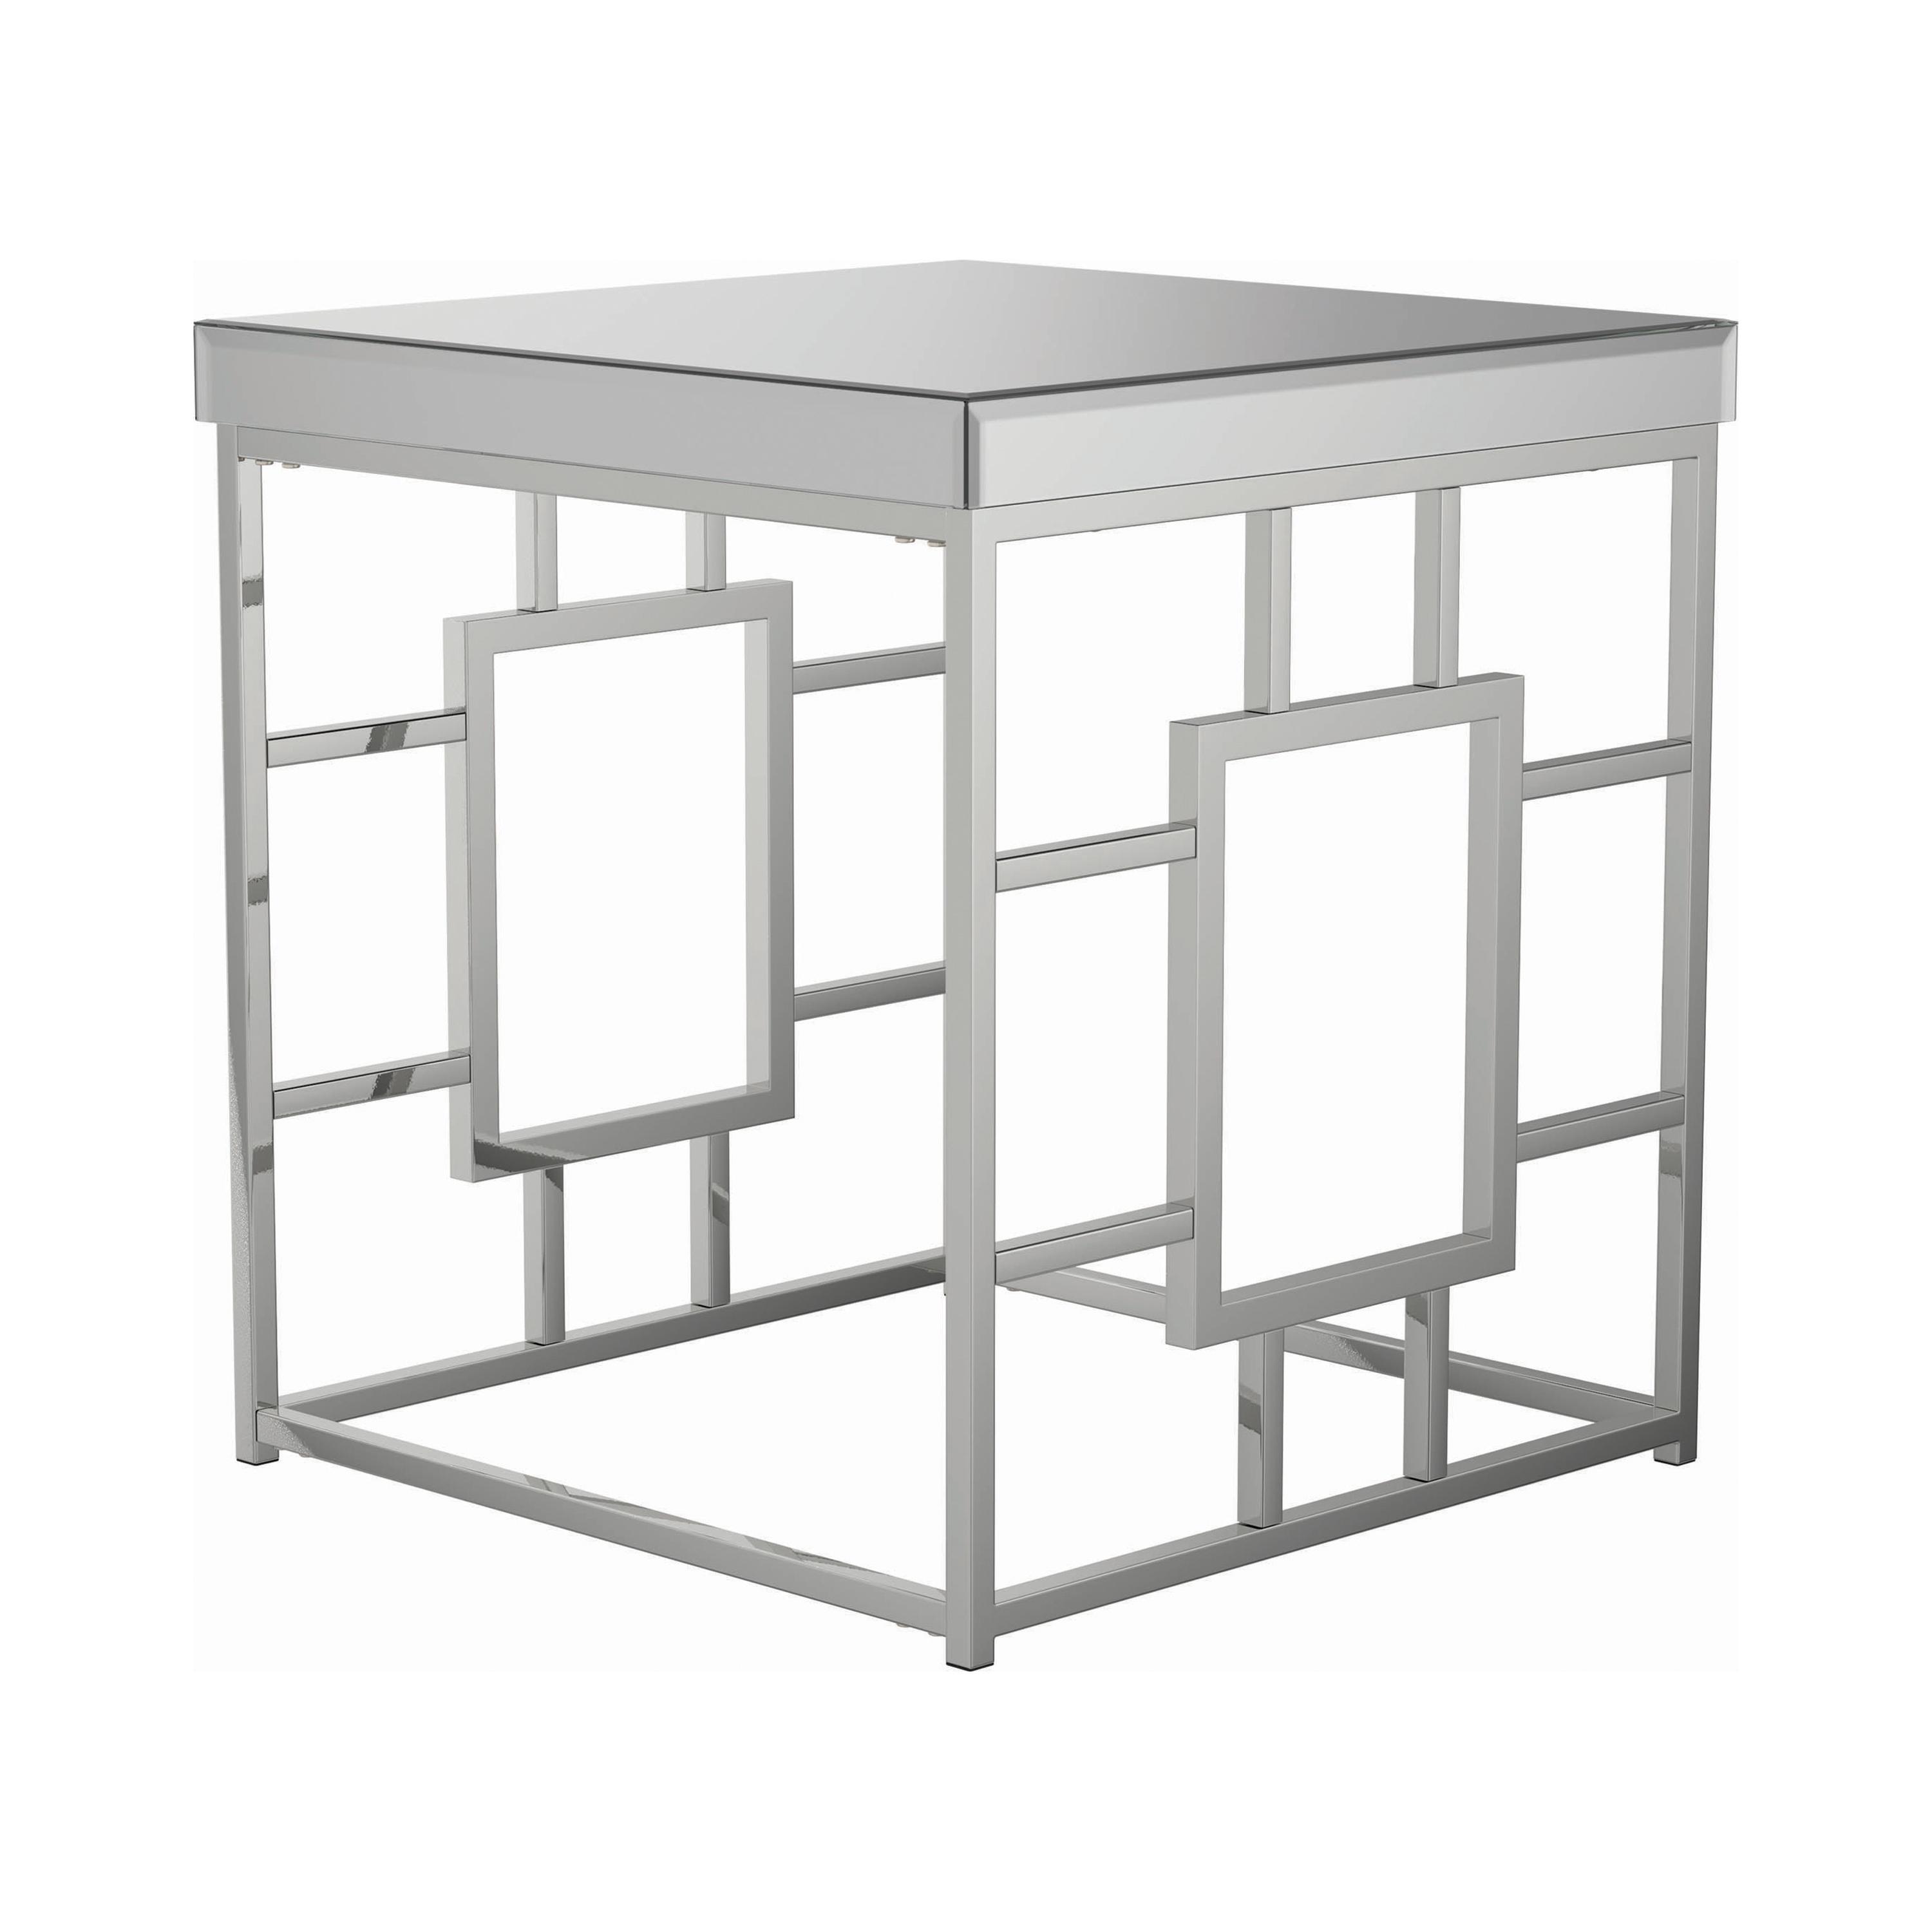 Contemporary End Table 723077 723077 in Chrome 